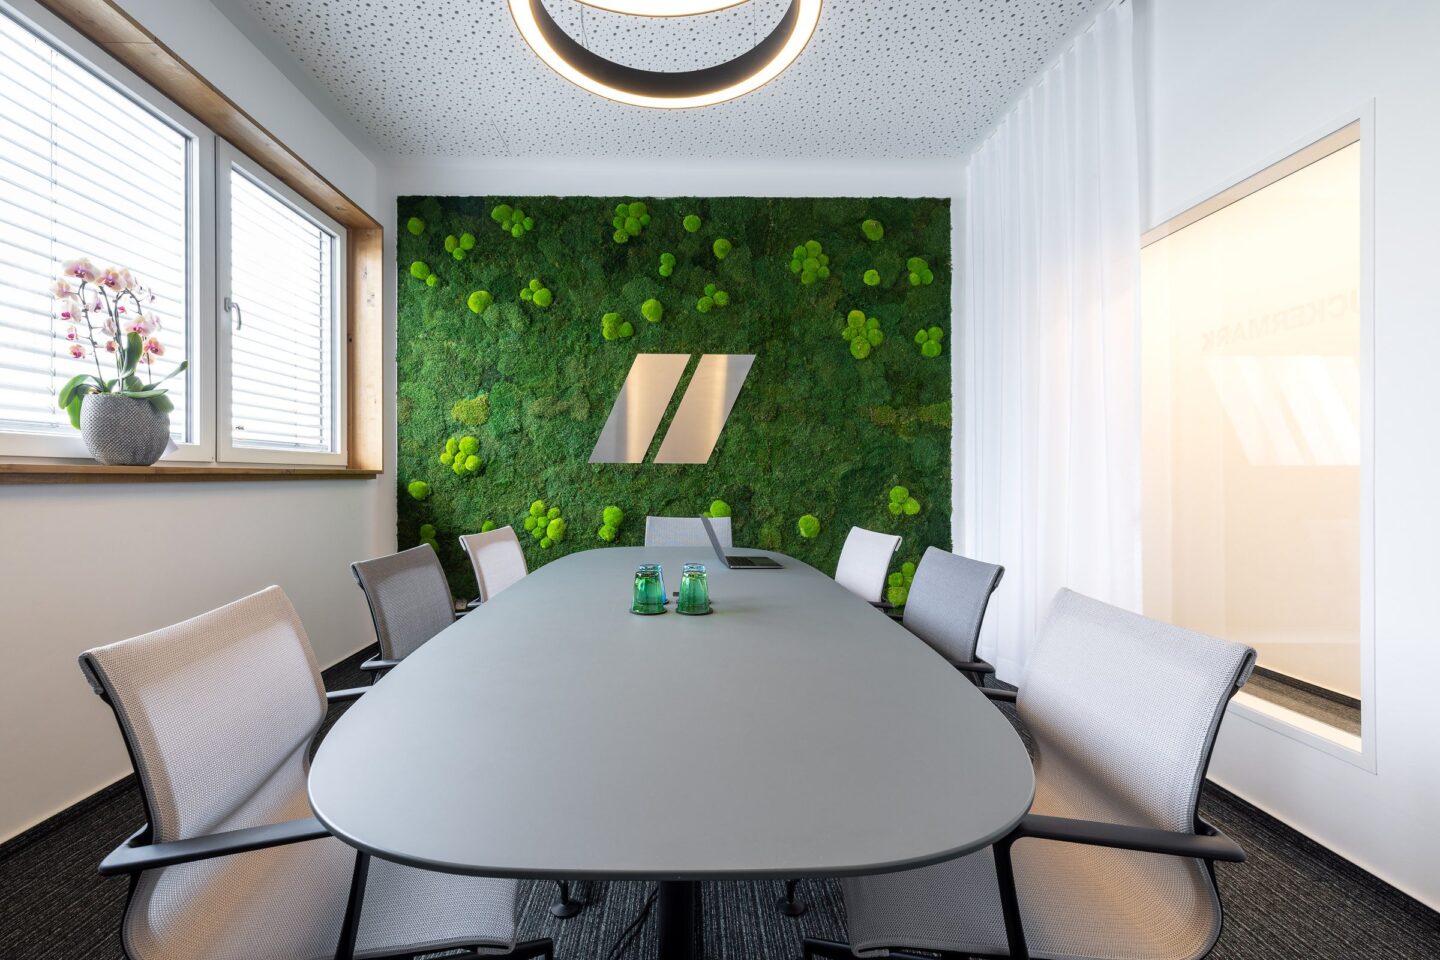 Biophilic design means creating a connection to nature in the working environment, especially through greenery and living plants